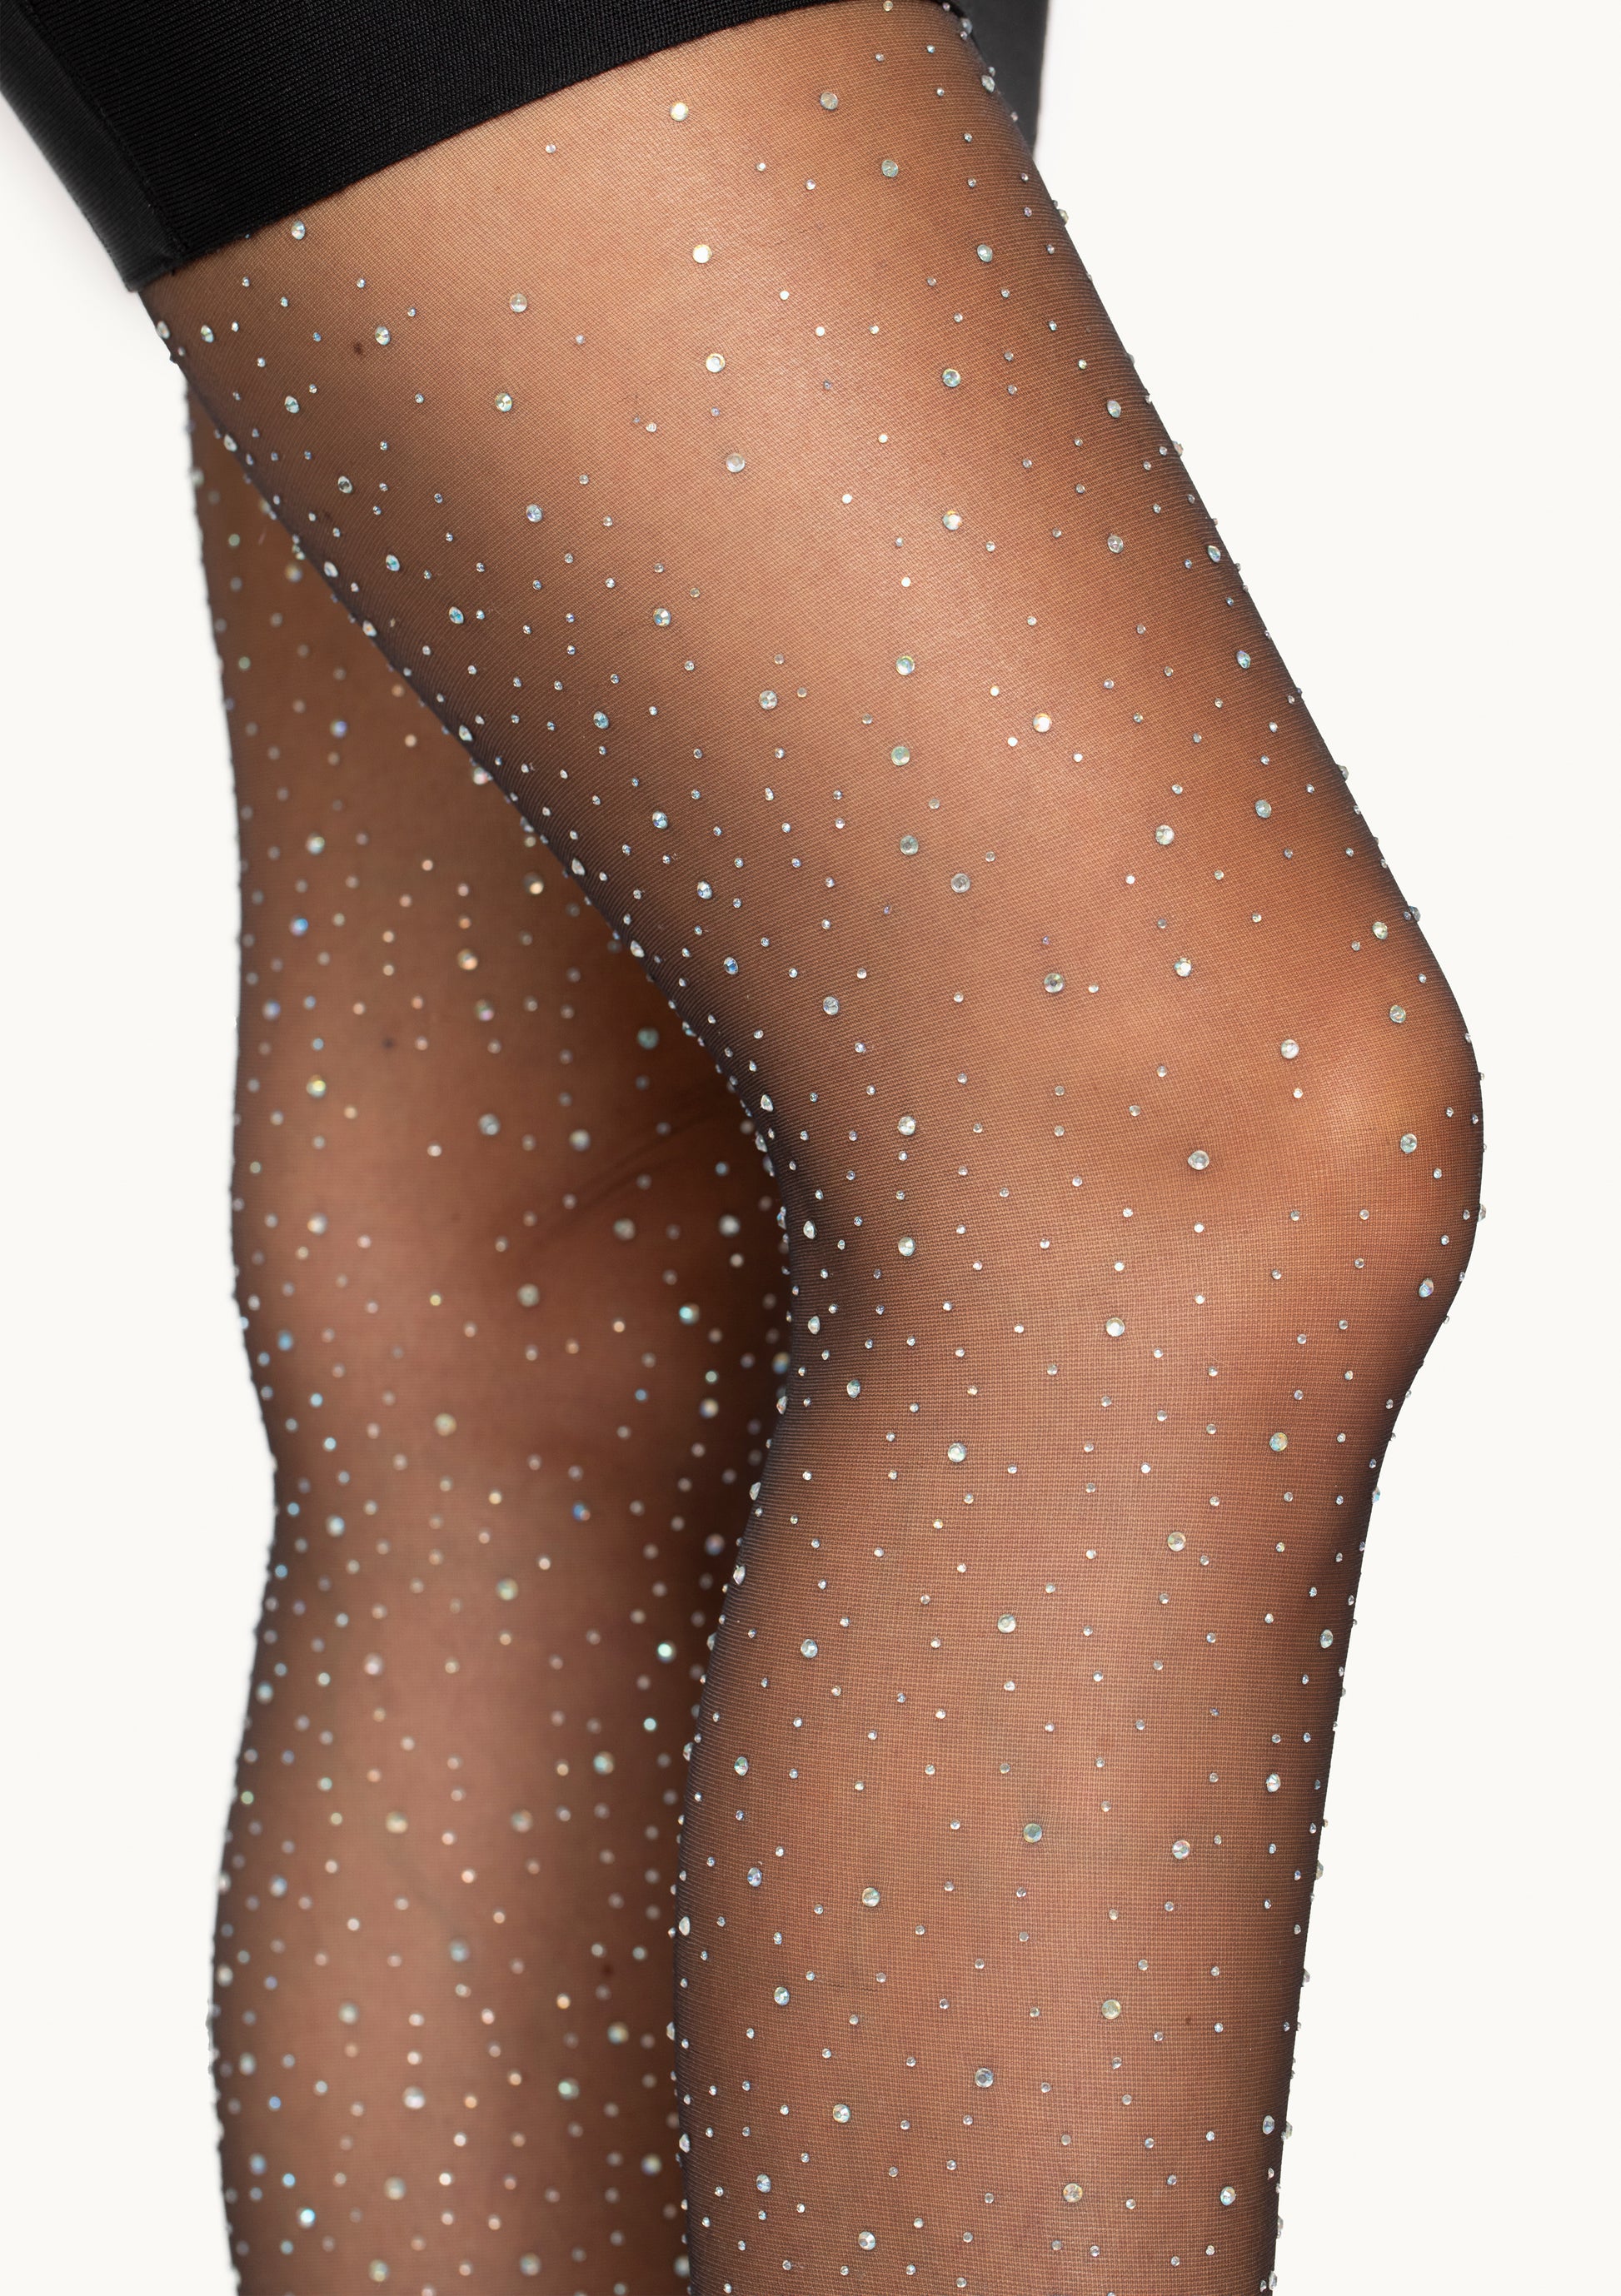 Leg Avenue 7957 Rhinestone Pantyhose - sheer black tights with dotted gemstones / diamante crystals all over, perfect hosiery for the sparkly party season